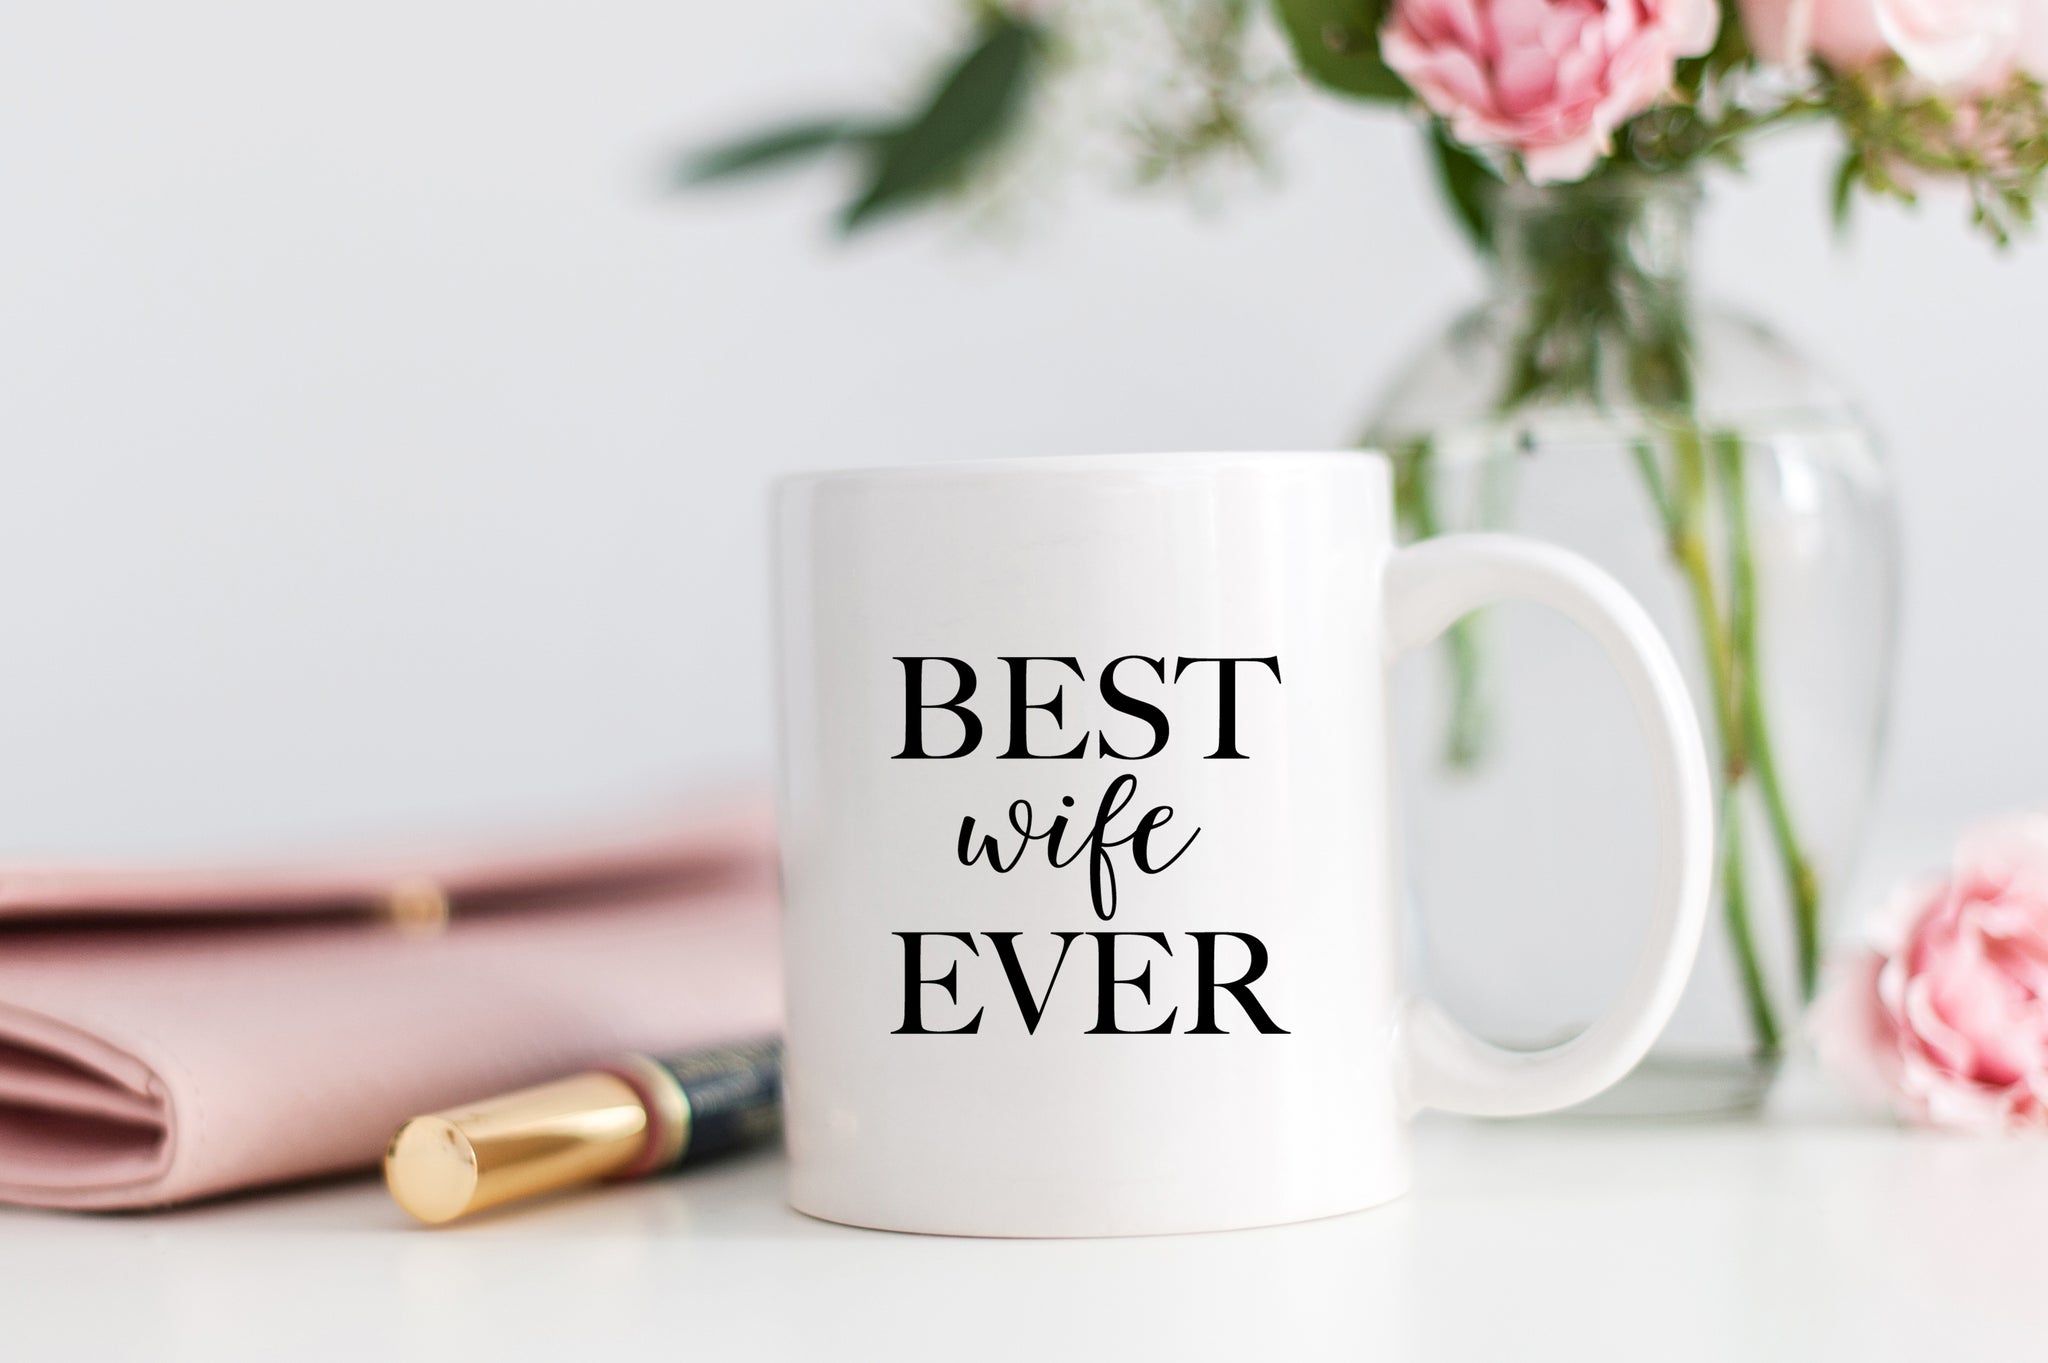 Best Wife Ever Mug - Mother's Day Gift for Wife - Pretty Collected